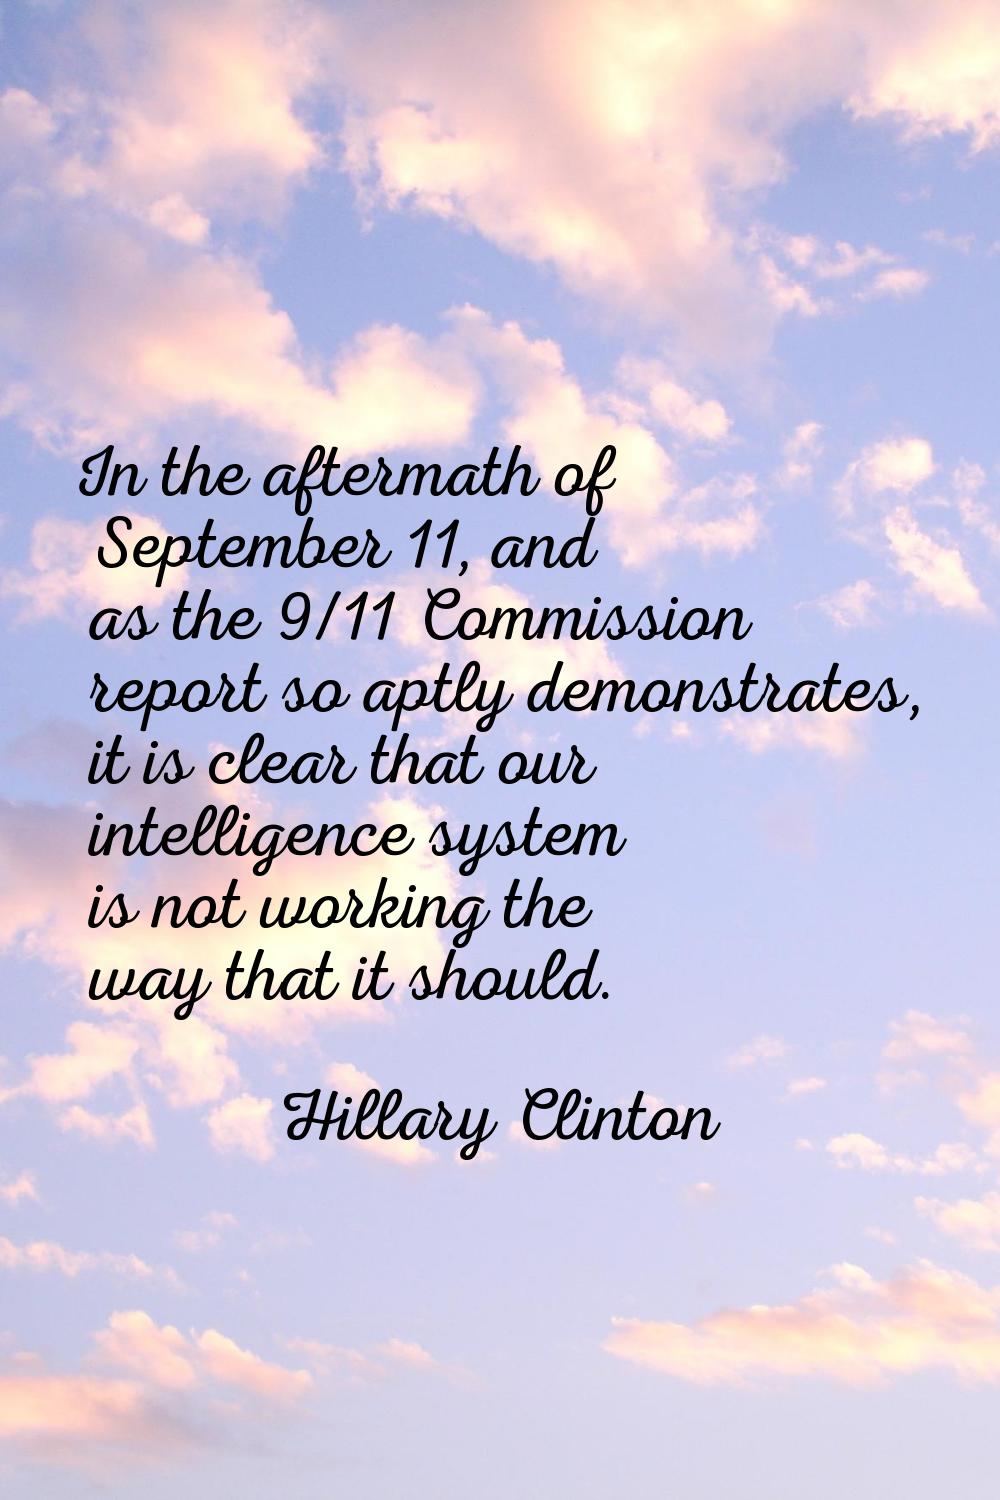 In the aftermath of September 11, and as the 9/11 Commission report so aptly demonstrates, it is cl